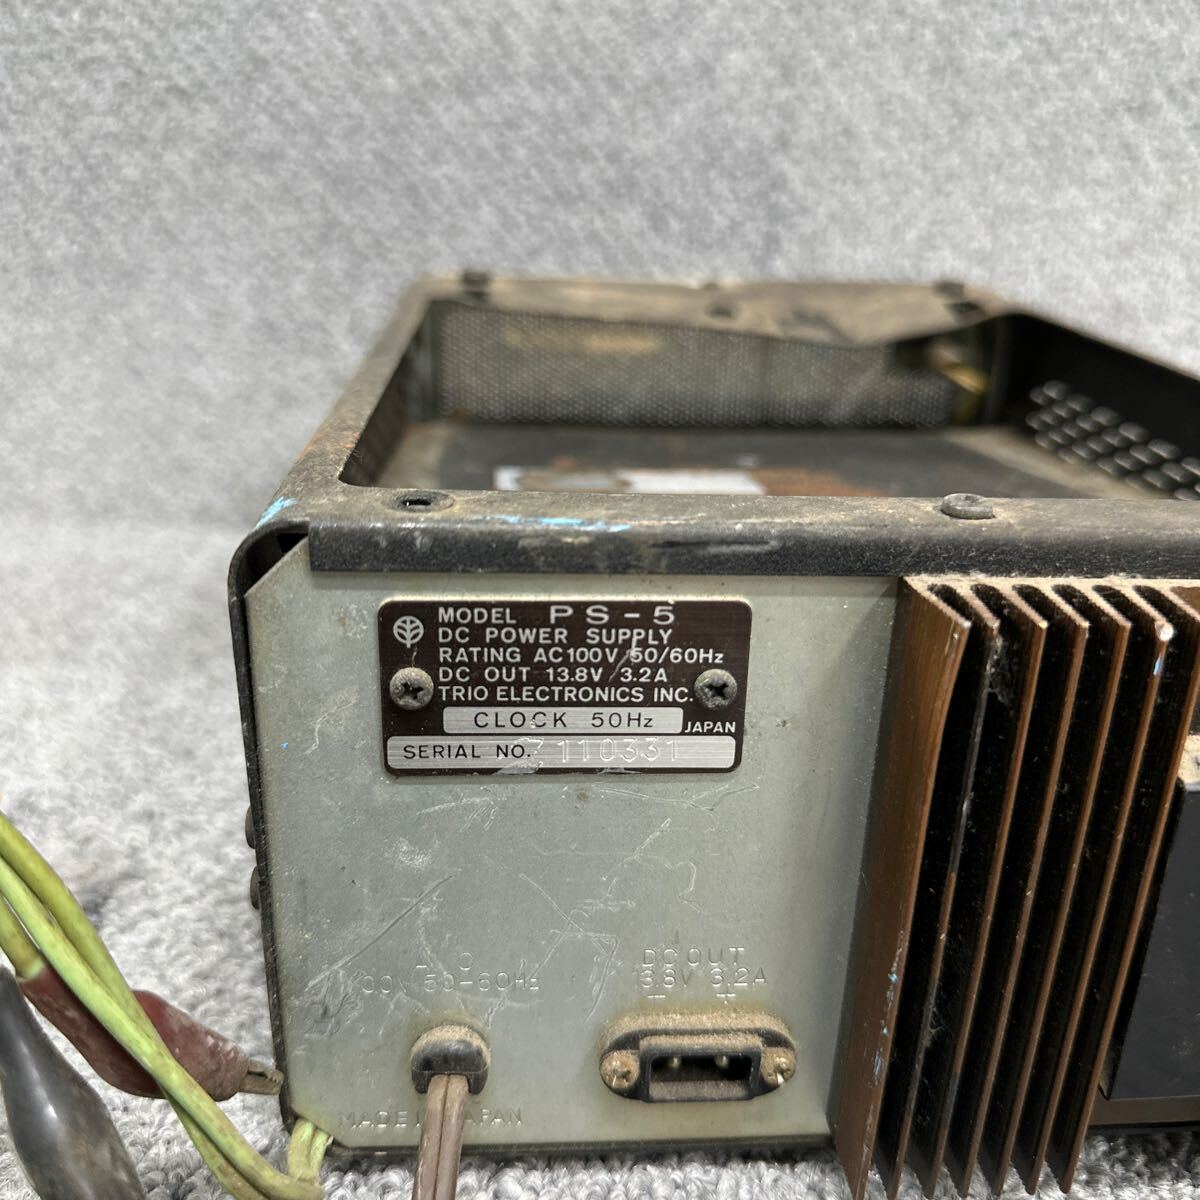 MYM5-61 super-discount TORIO PS-5 POWER SUPPLY Trio power supply transceiver stabilizing supply electrification OK used present condition goods *3 times re-exhibition . liquidation 